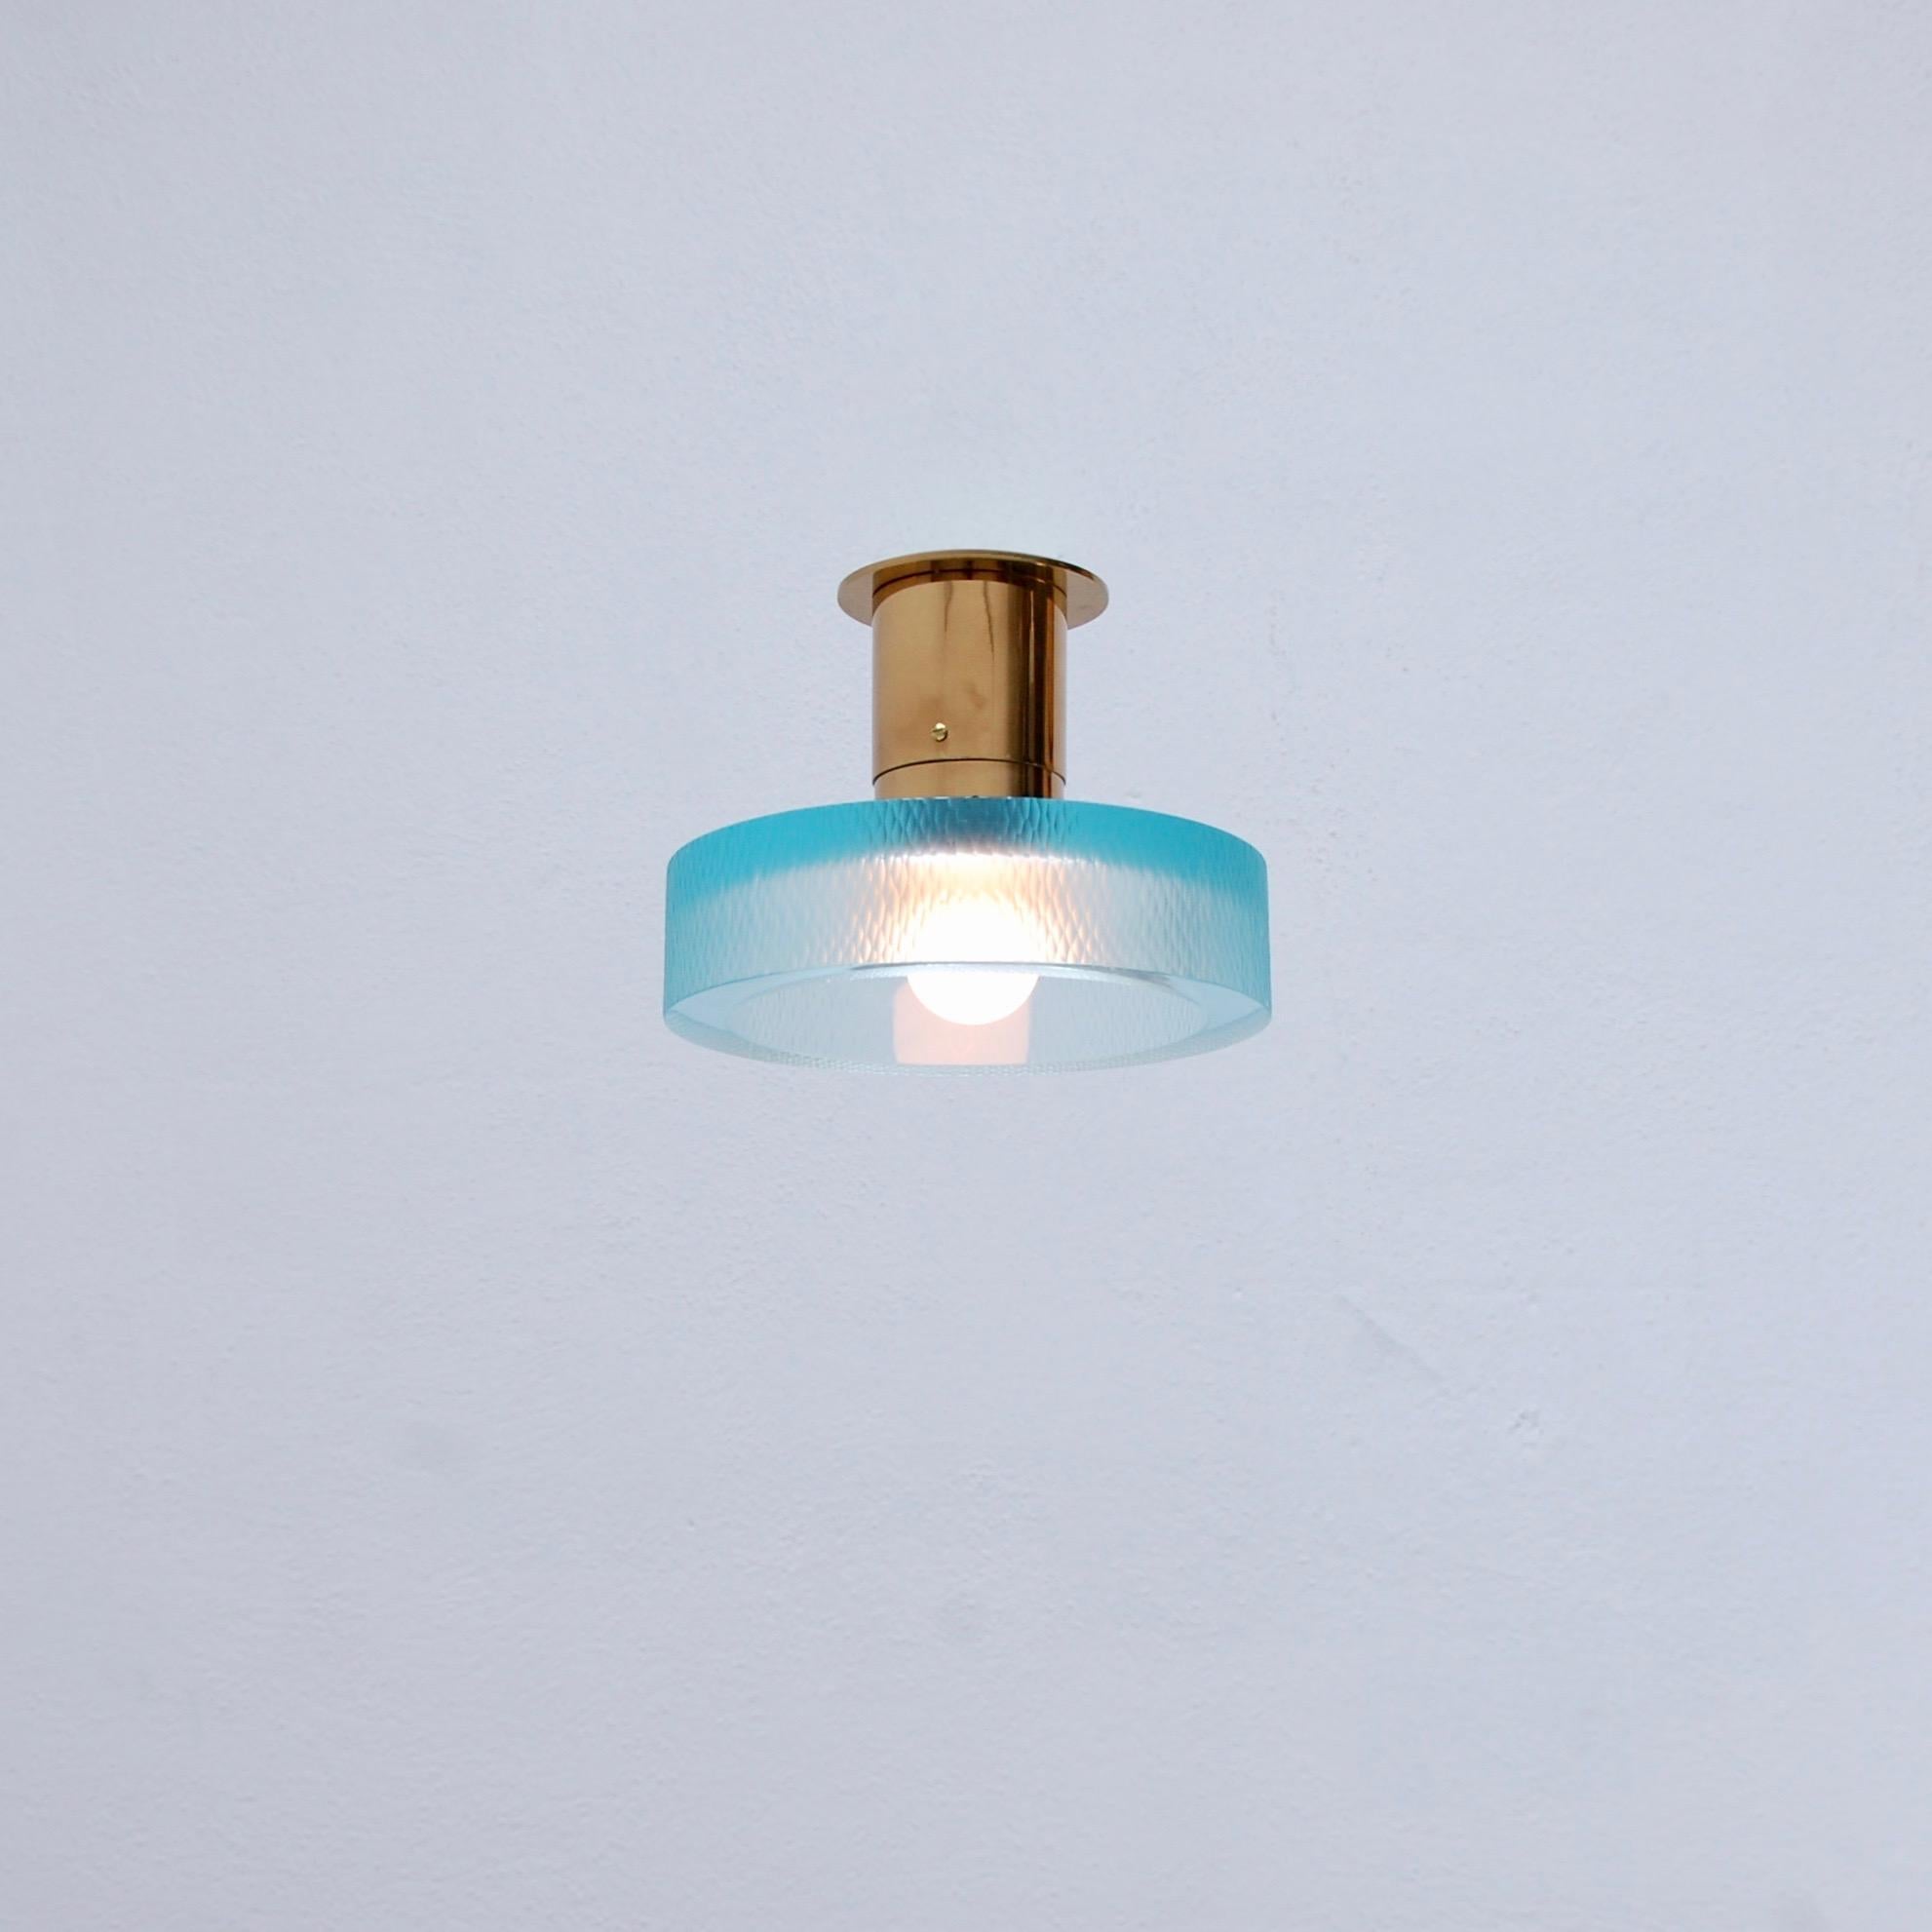 A classical Seguso Ceiling fixture from midcentury Italy in aqua marine glass and brass. Partially restored. (1) E26 medium based socket. In brass and glass. Priced individually. Light bulb included. Measurements:
Measure: Height 7”
Diameter 8.75”.
 